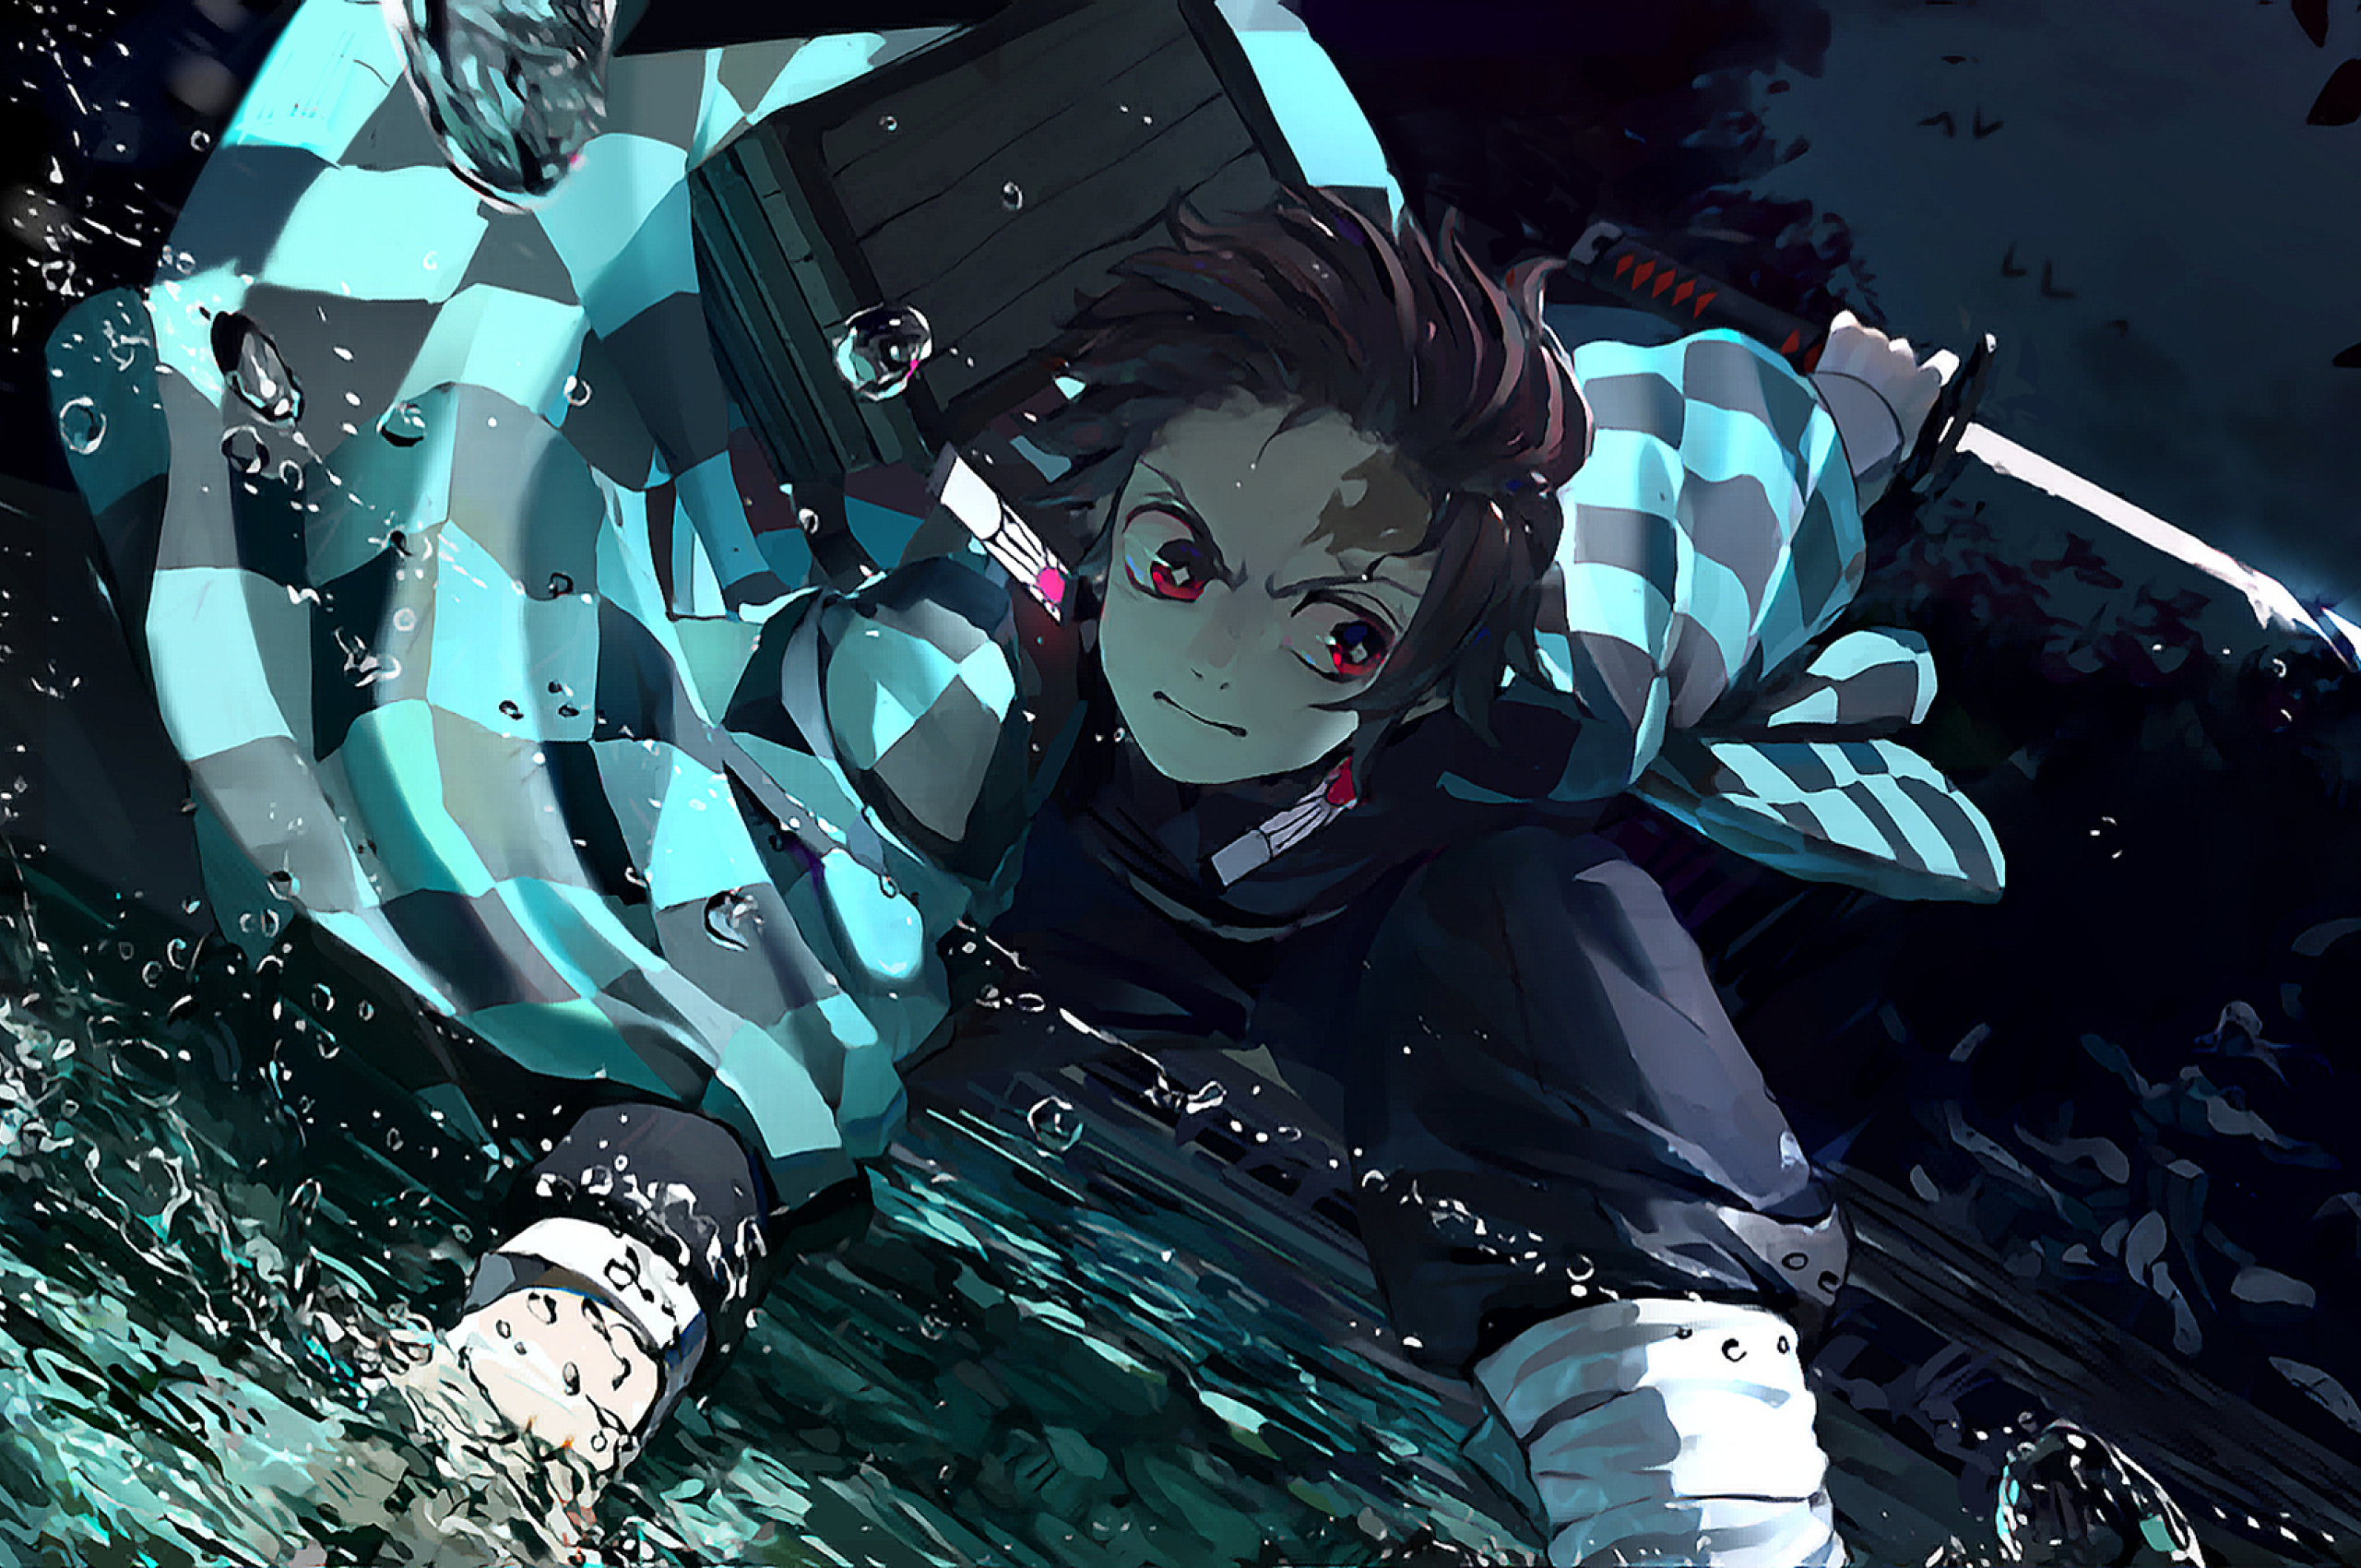 Demon Slayer Wallpaper Chromebook Anime Wallpaper Hd We hope you enjoy our growing collection of hd images to use as a background or home screen for please contact us if you want to publish an aesthetic chromebook wallpaper on our site. demon slayer wallpaper chromebook